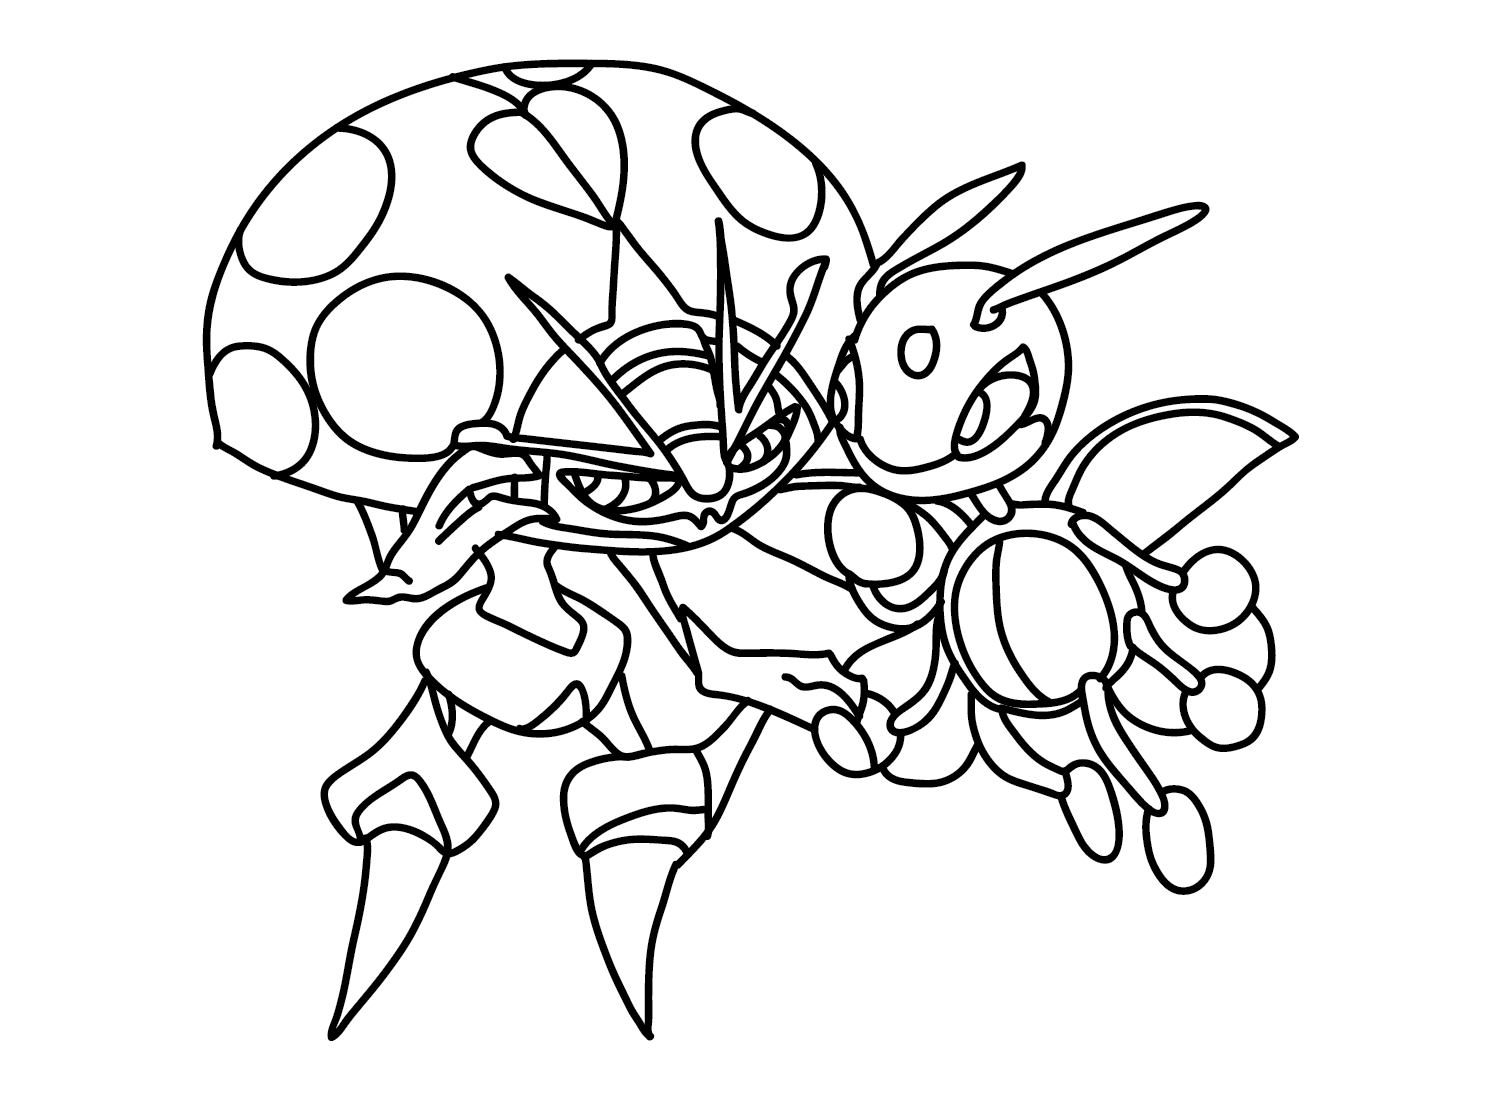 Orbeetle Free Coloring Page